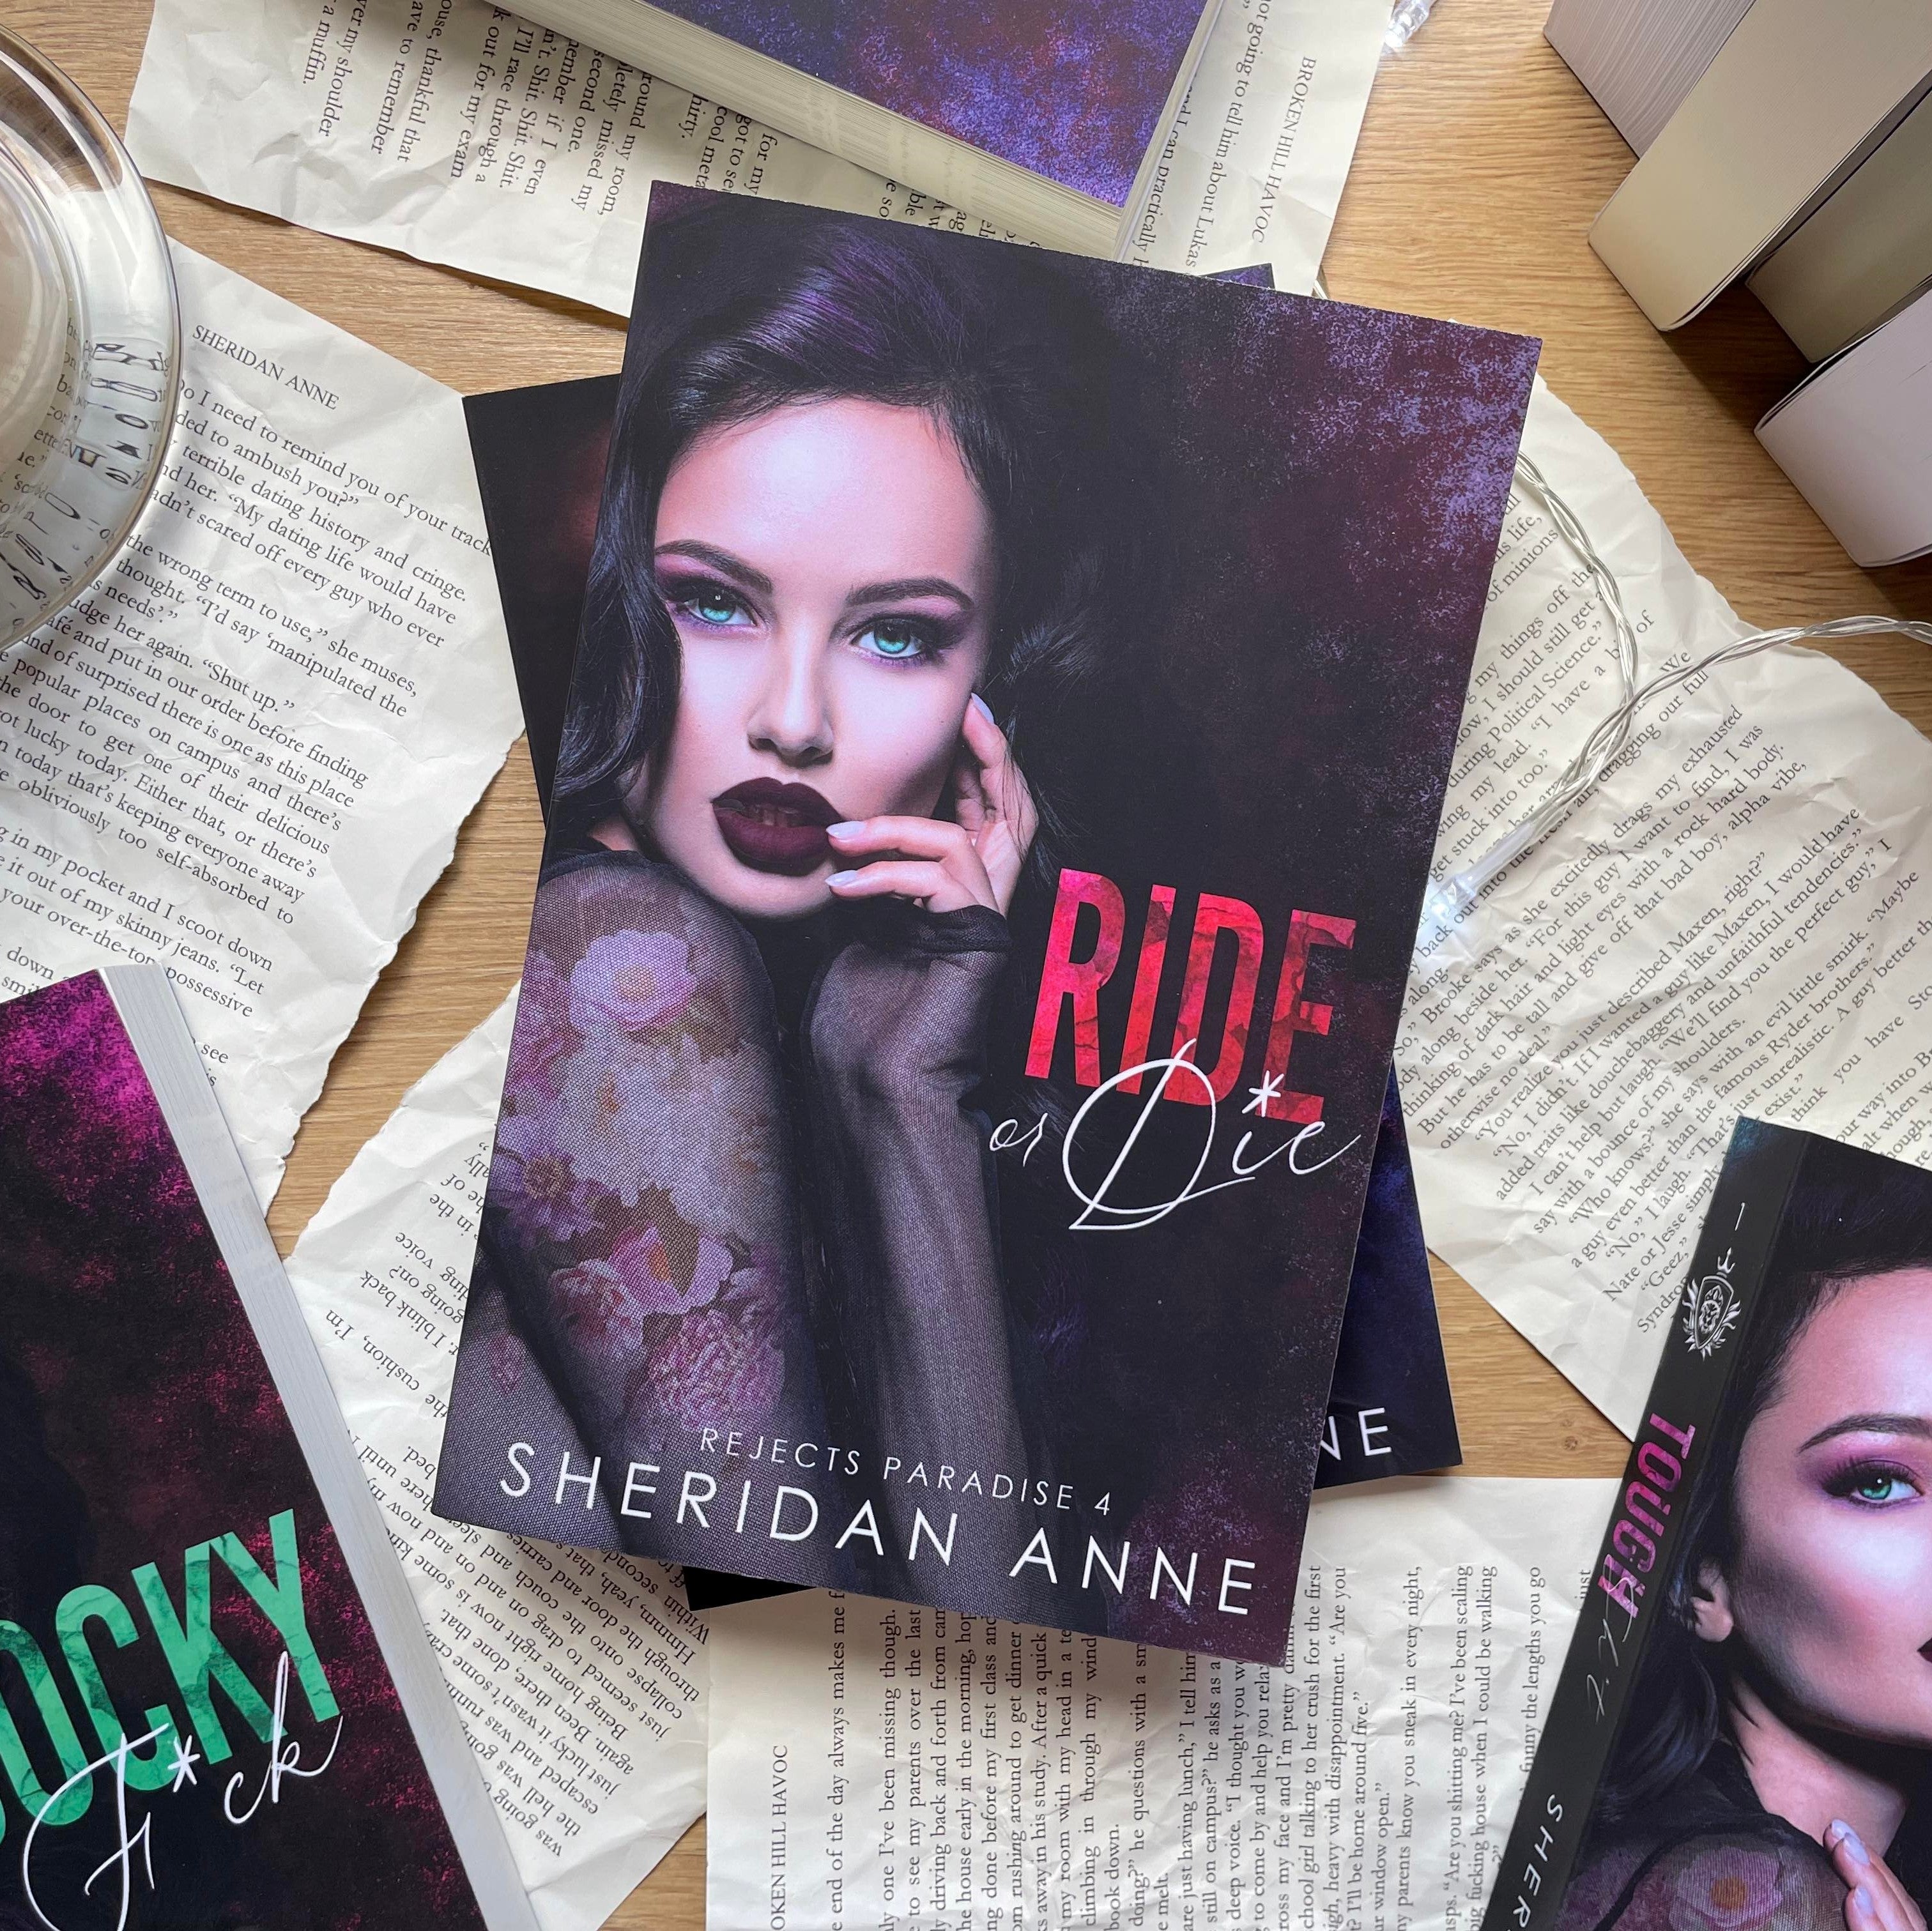 Rejects Paradise series by Sheridan Anne